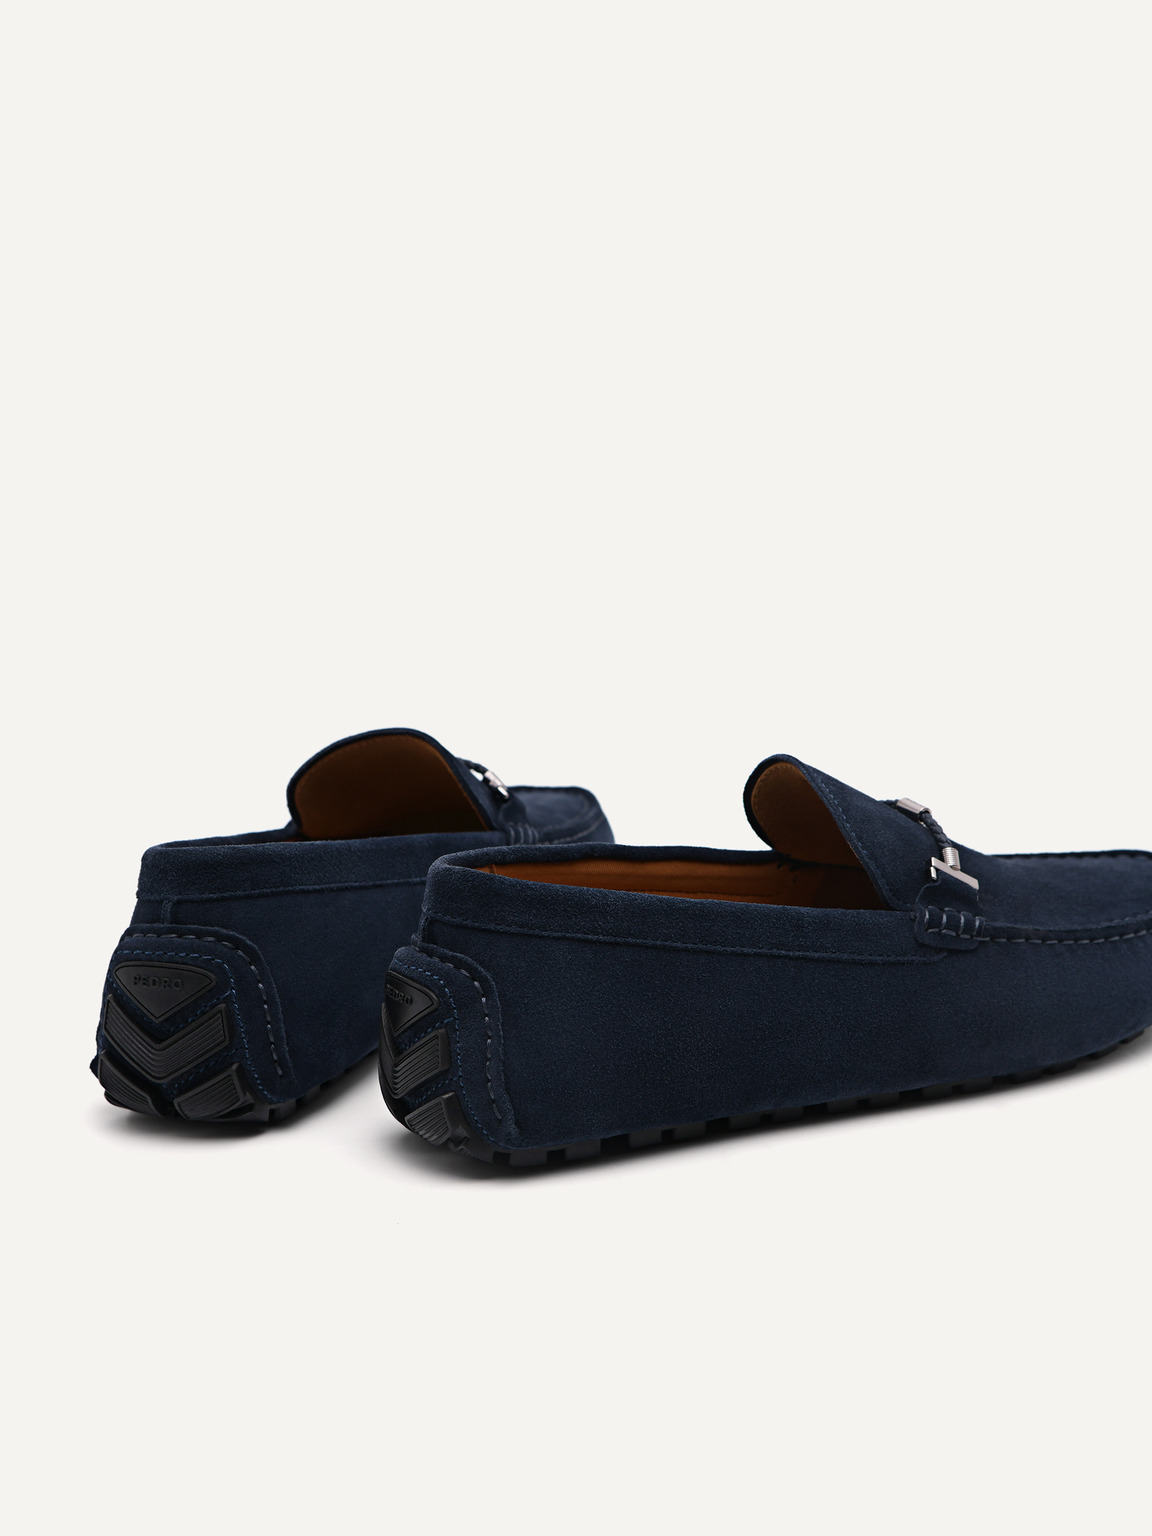 Robert Leather Driving Shoes, Navy